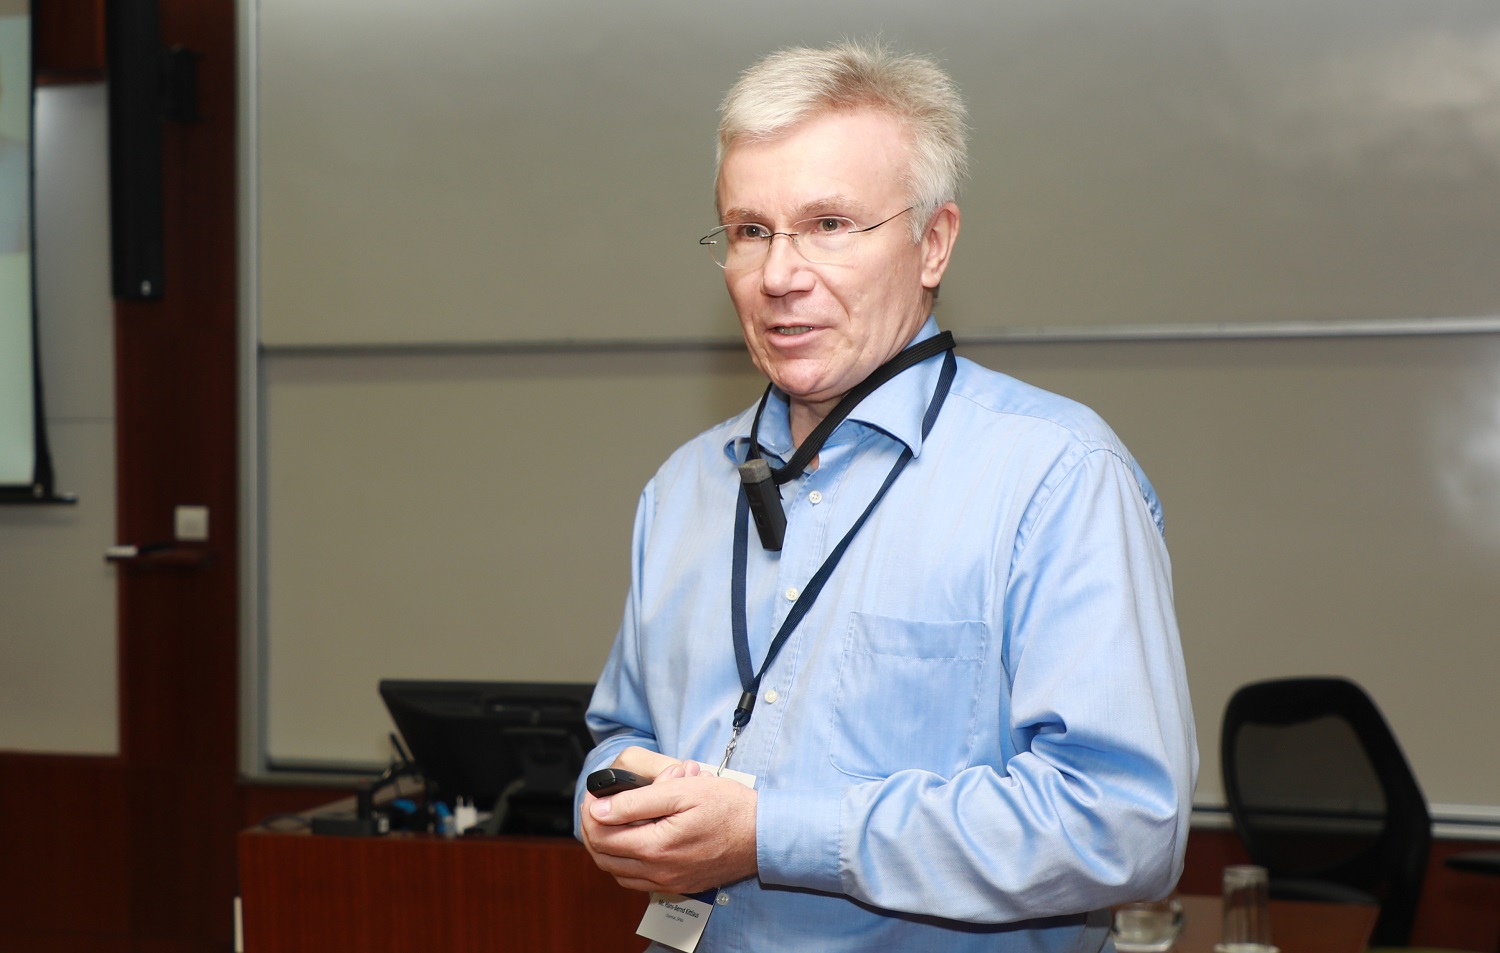 Prof. Hans-Bernd Kittlaus, Chairman, ISPMA, speaks at the workshop on ‘Software Business Models – Are you really managing a Standard Product?’